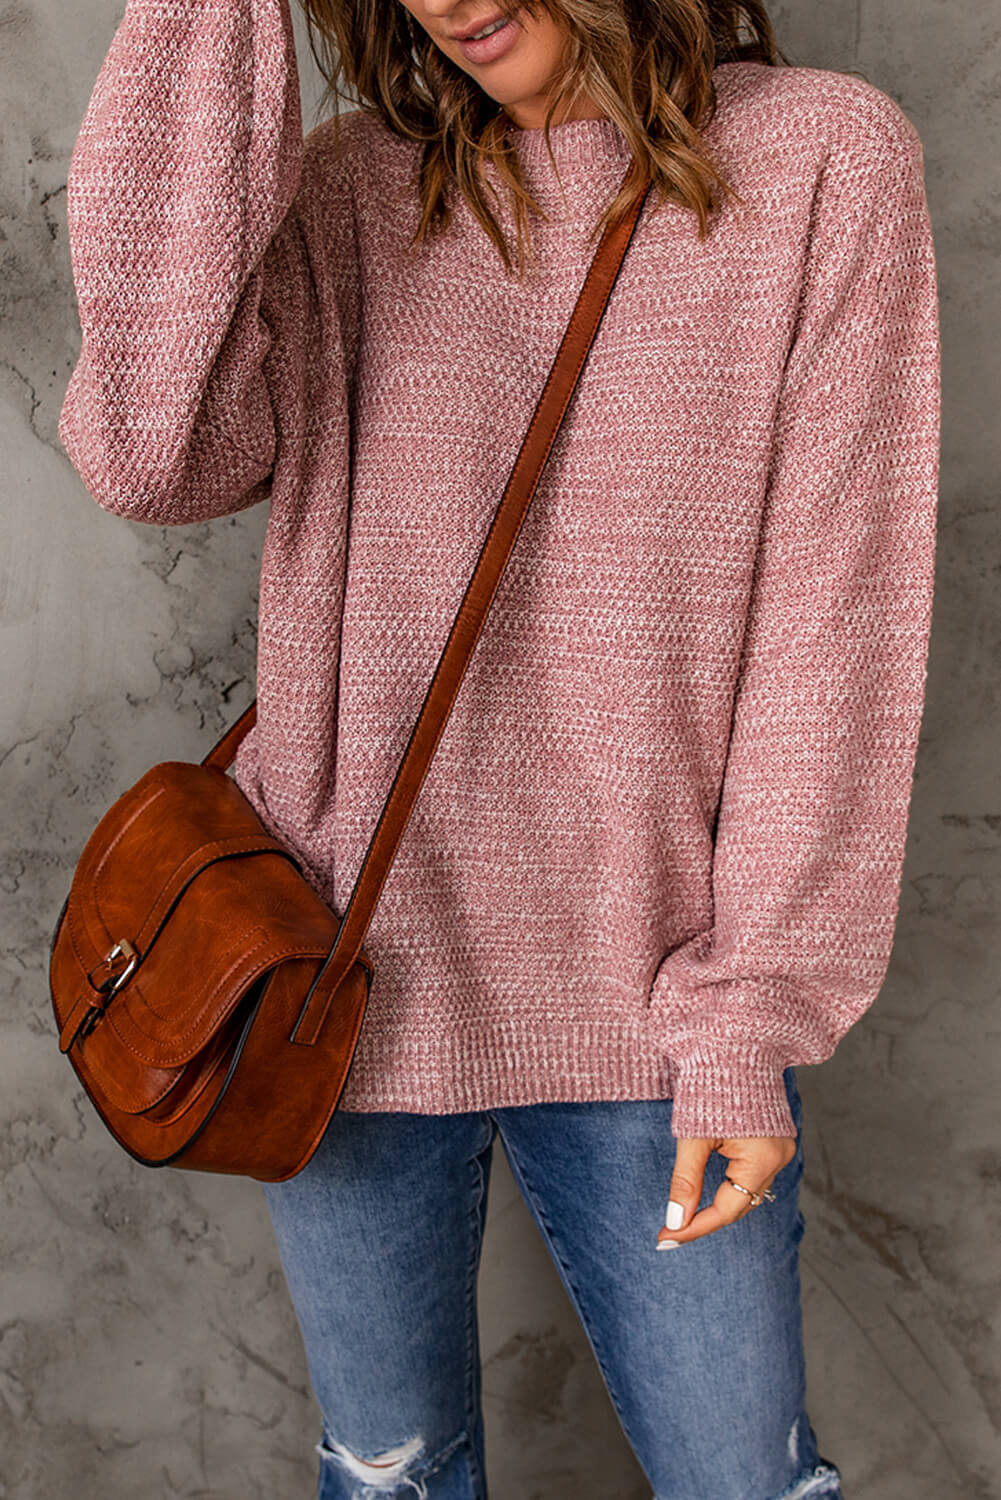 Double Take Heathered Dropped Shoulder Round Neck Sweater